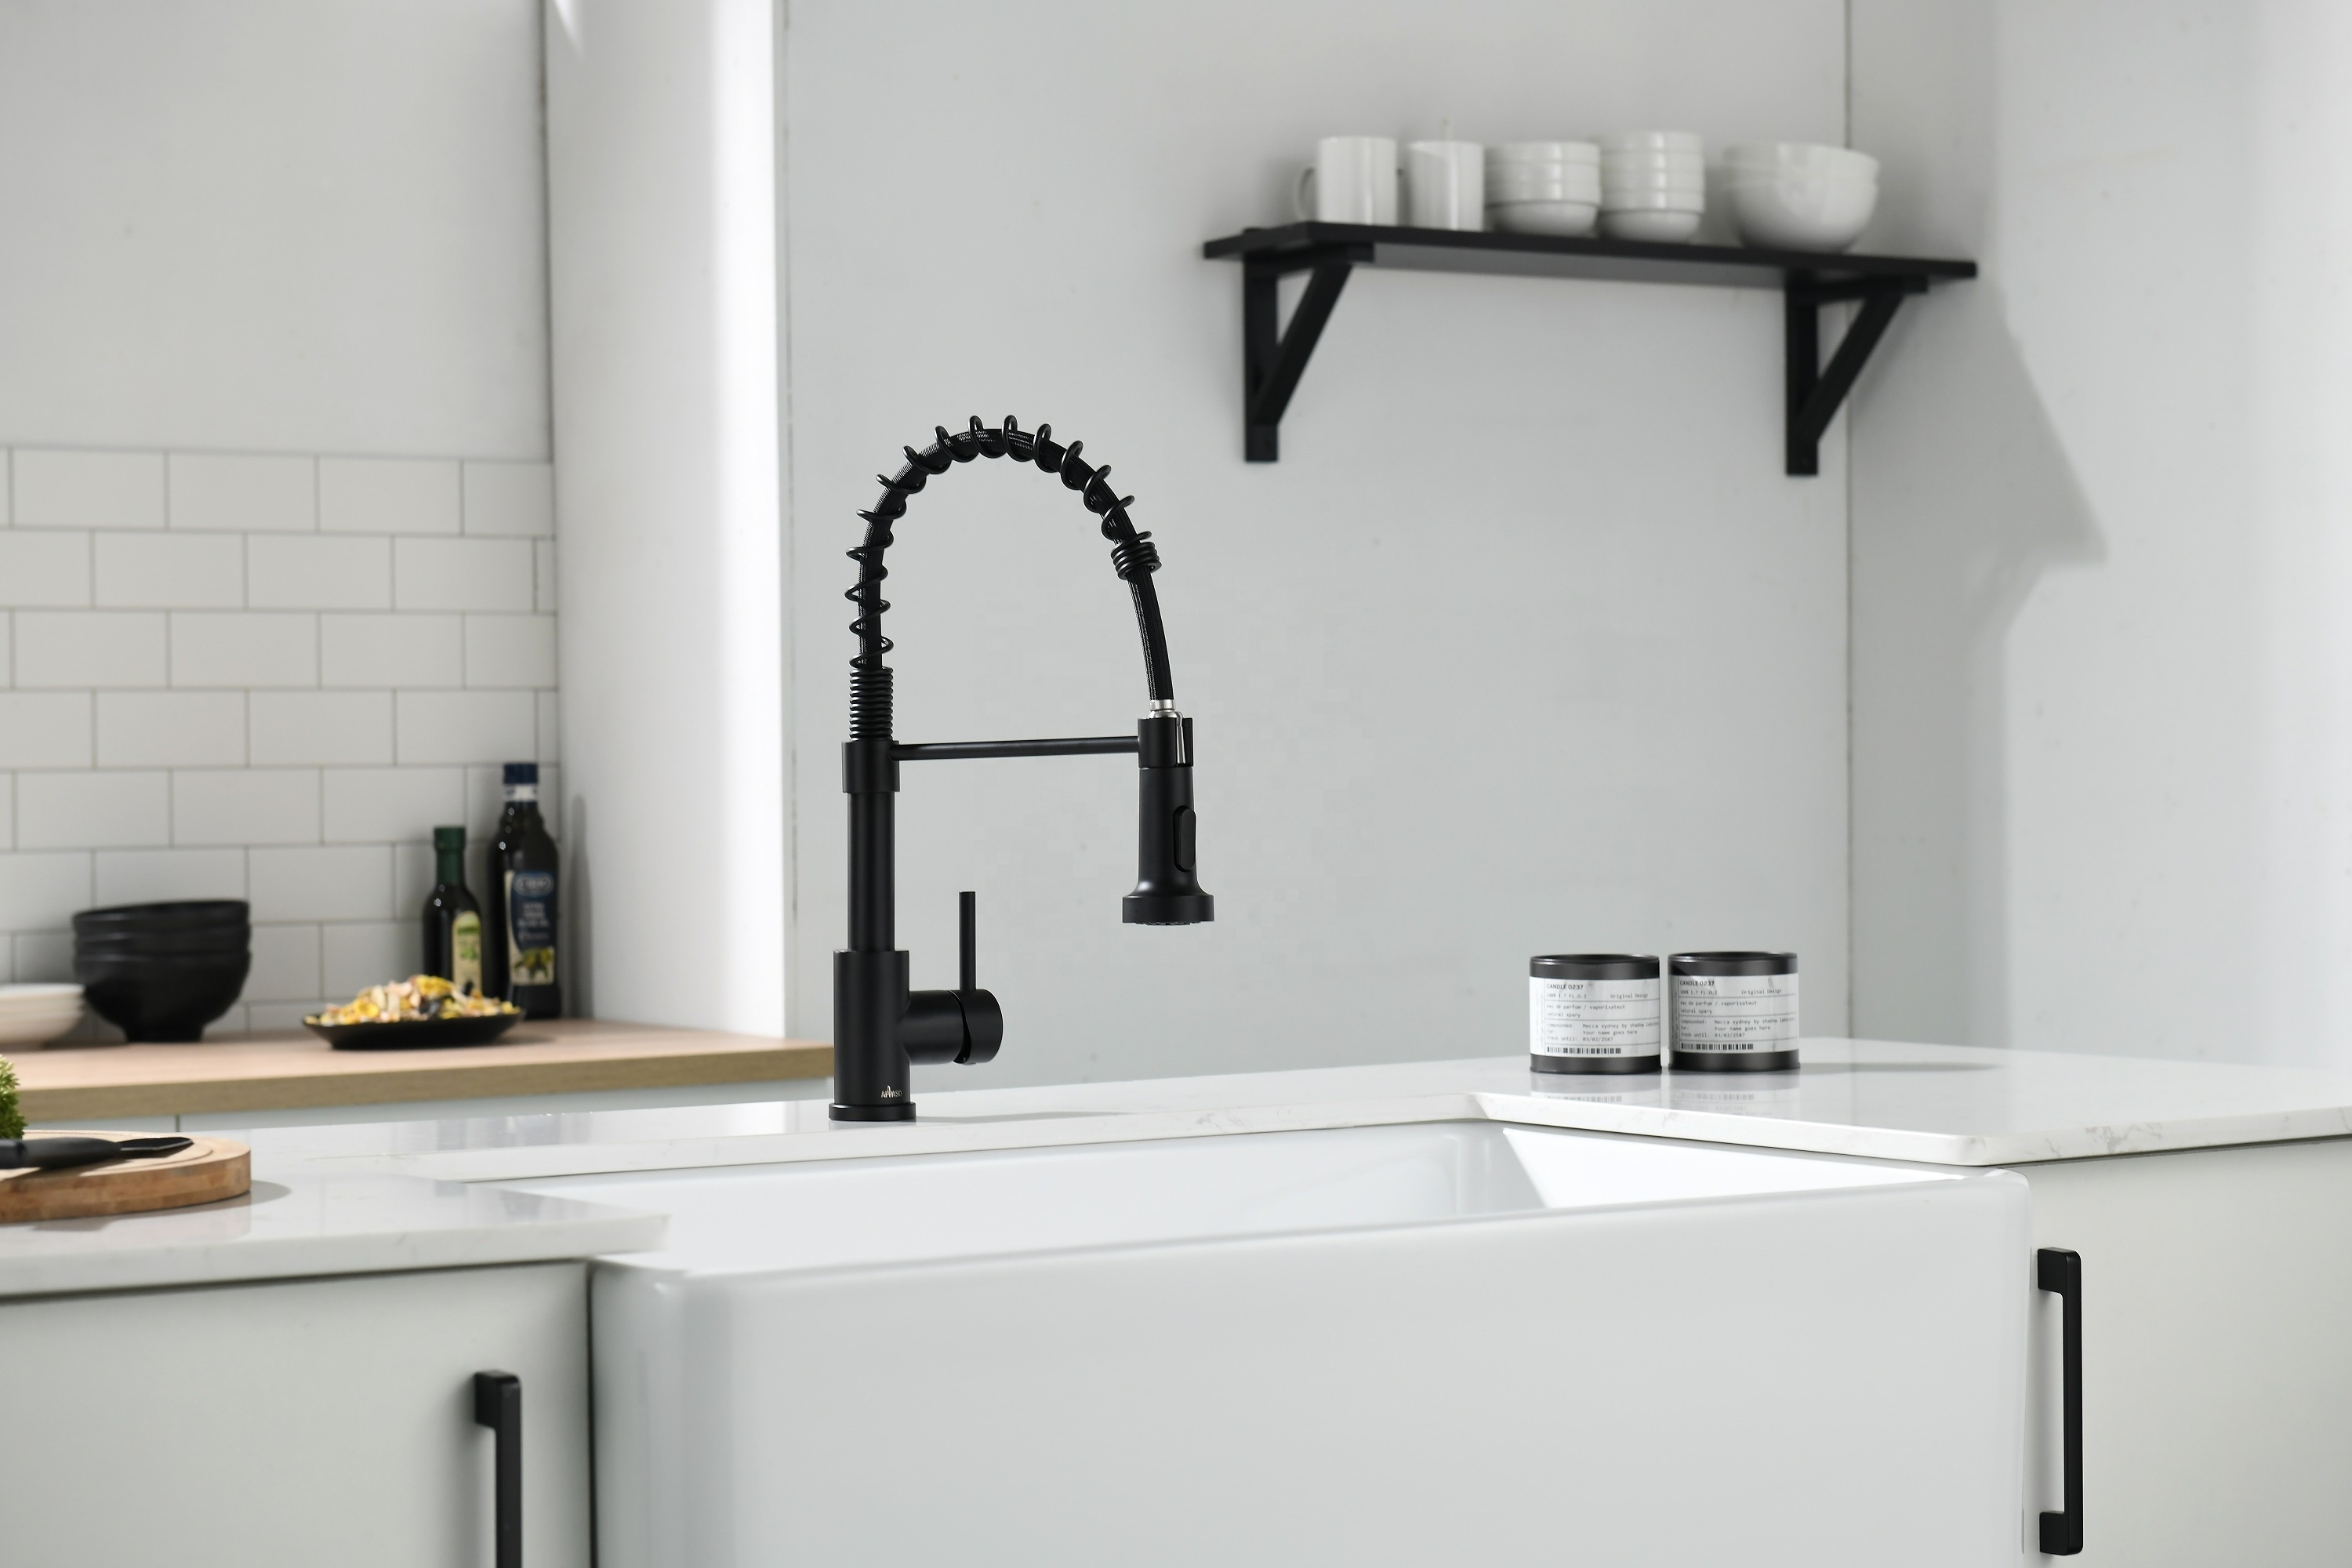 APS262-MB Kitchen Stainless Faucet Kitchen Faucet With Sprayer Hot And Cold Taps Water Mixer Faucets Taps Kitchen